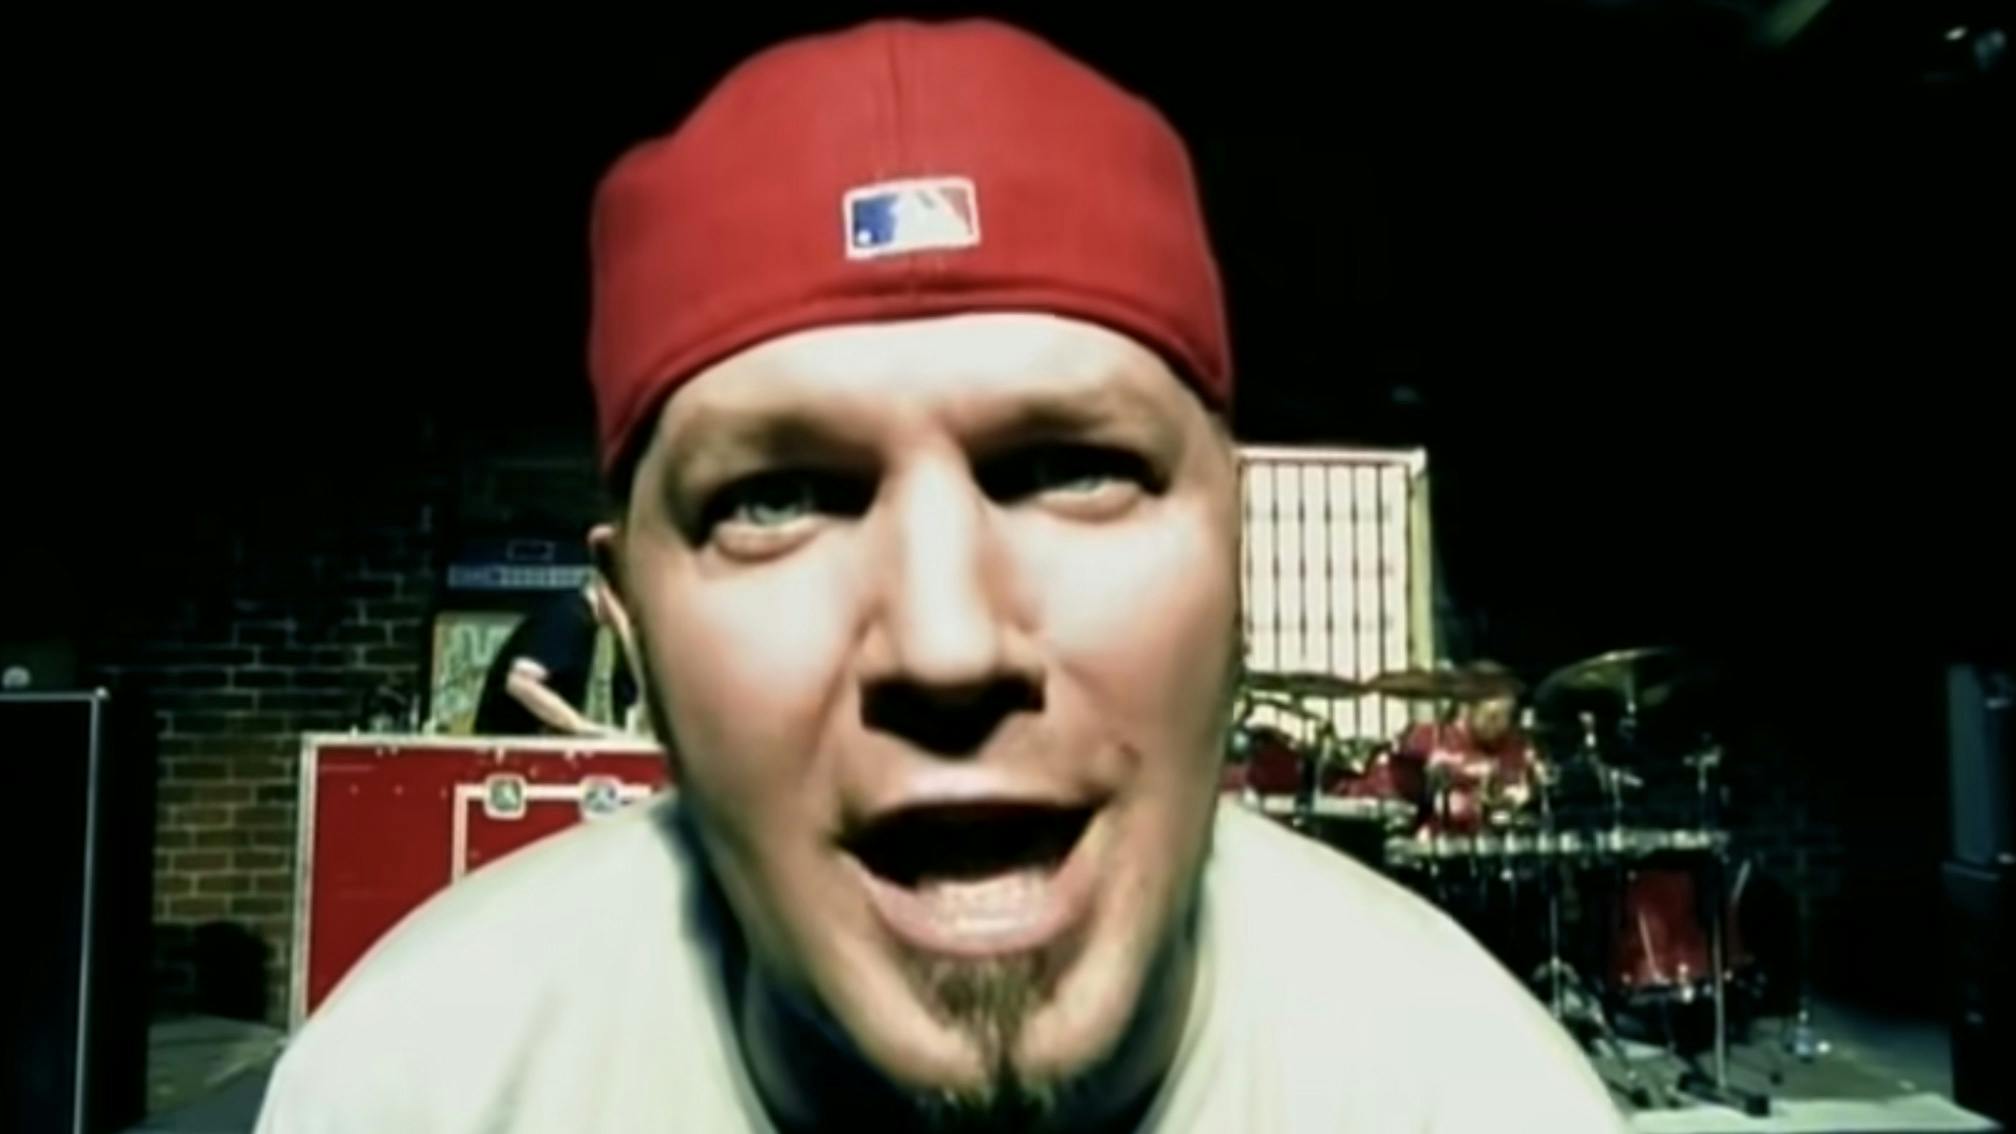 The new Limp Bizkit album is almost finished, they're just waiting on Fred's vocals